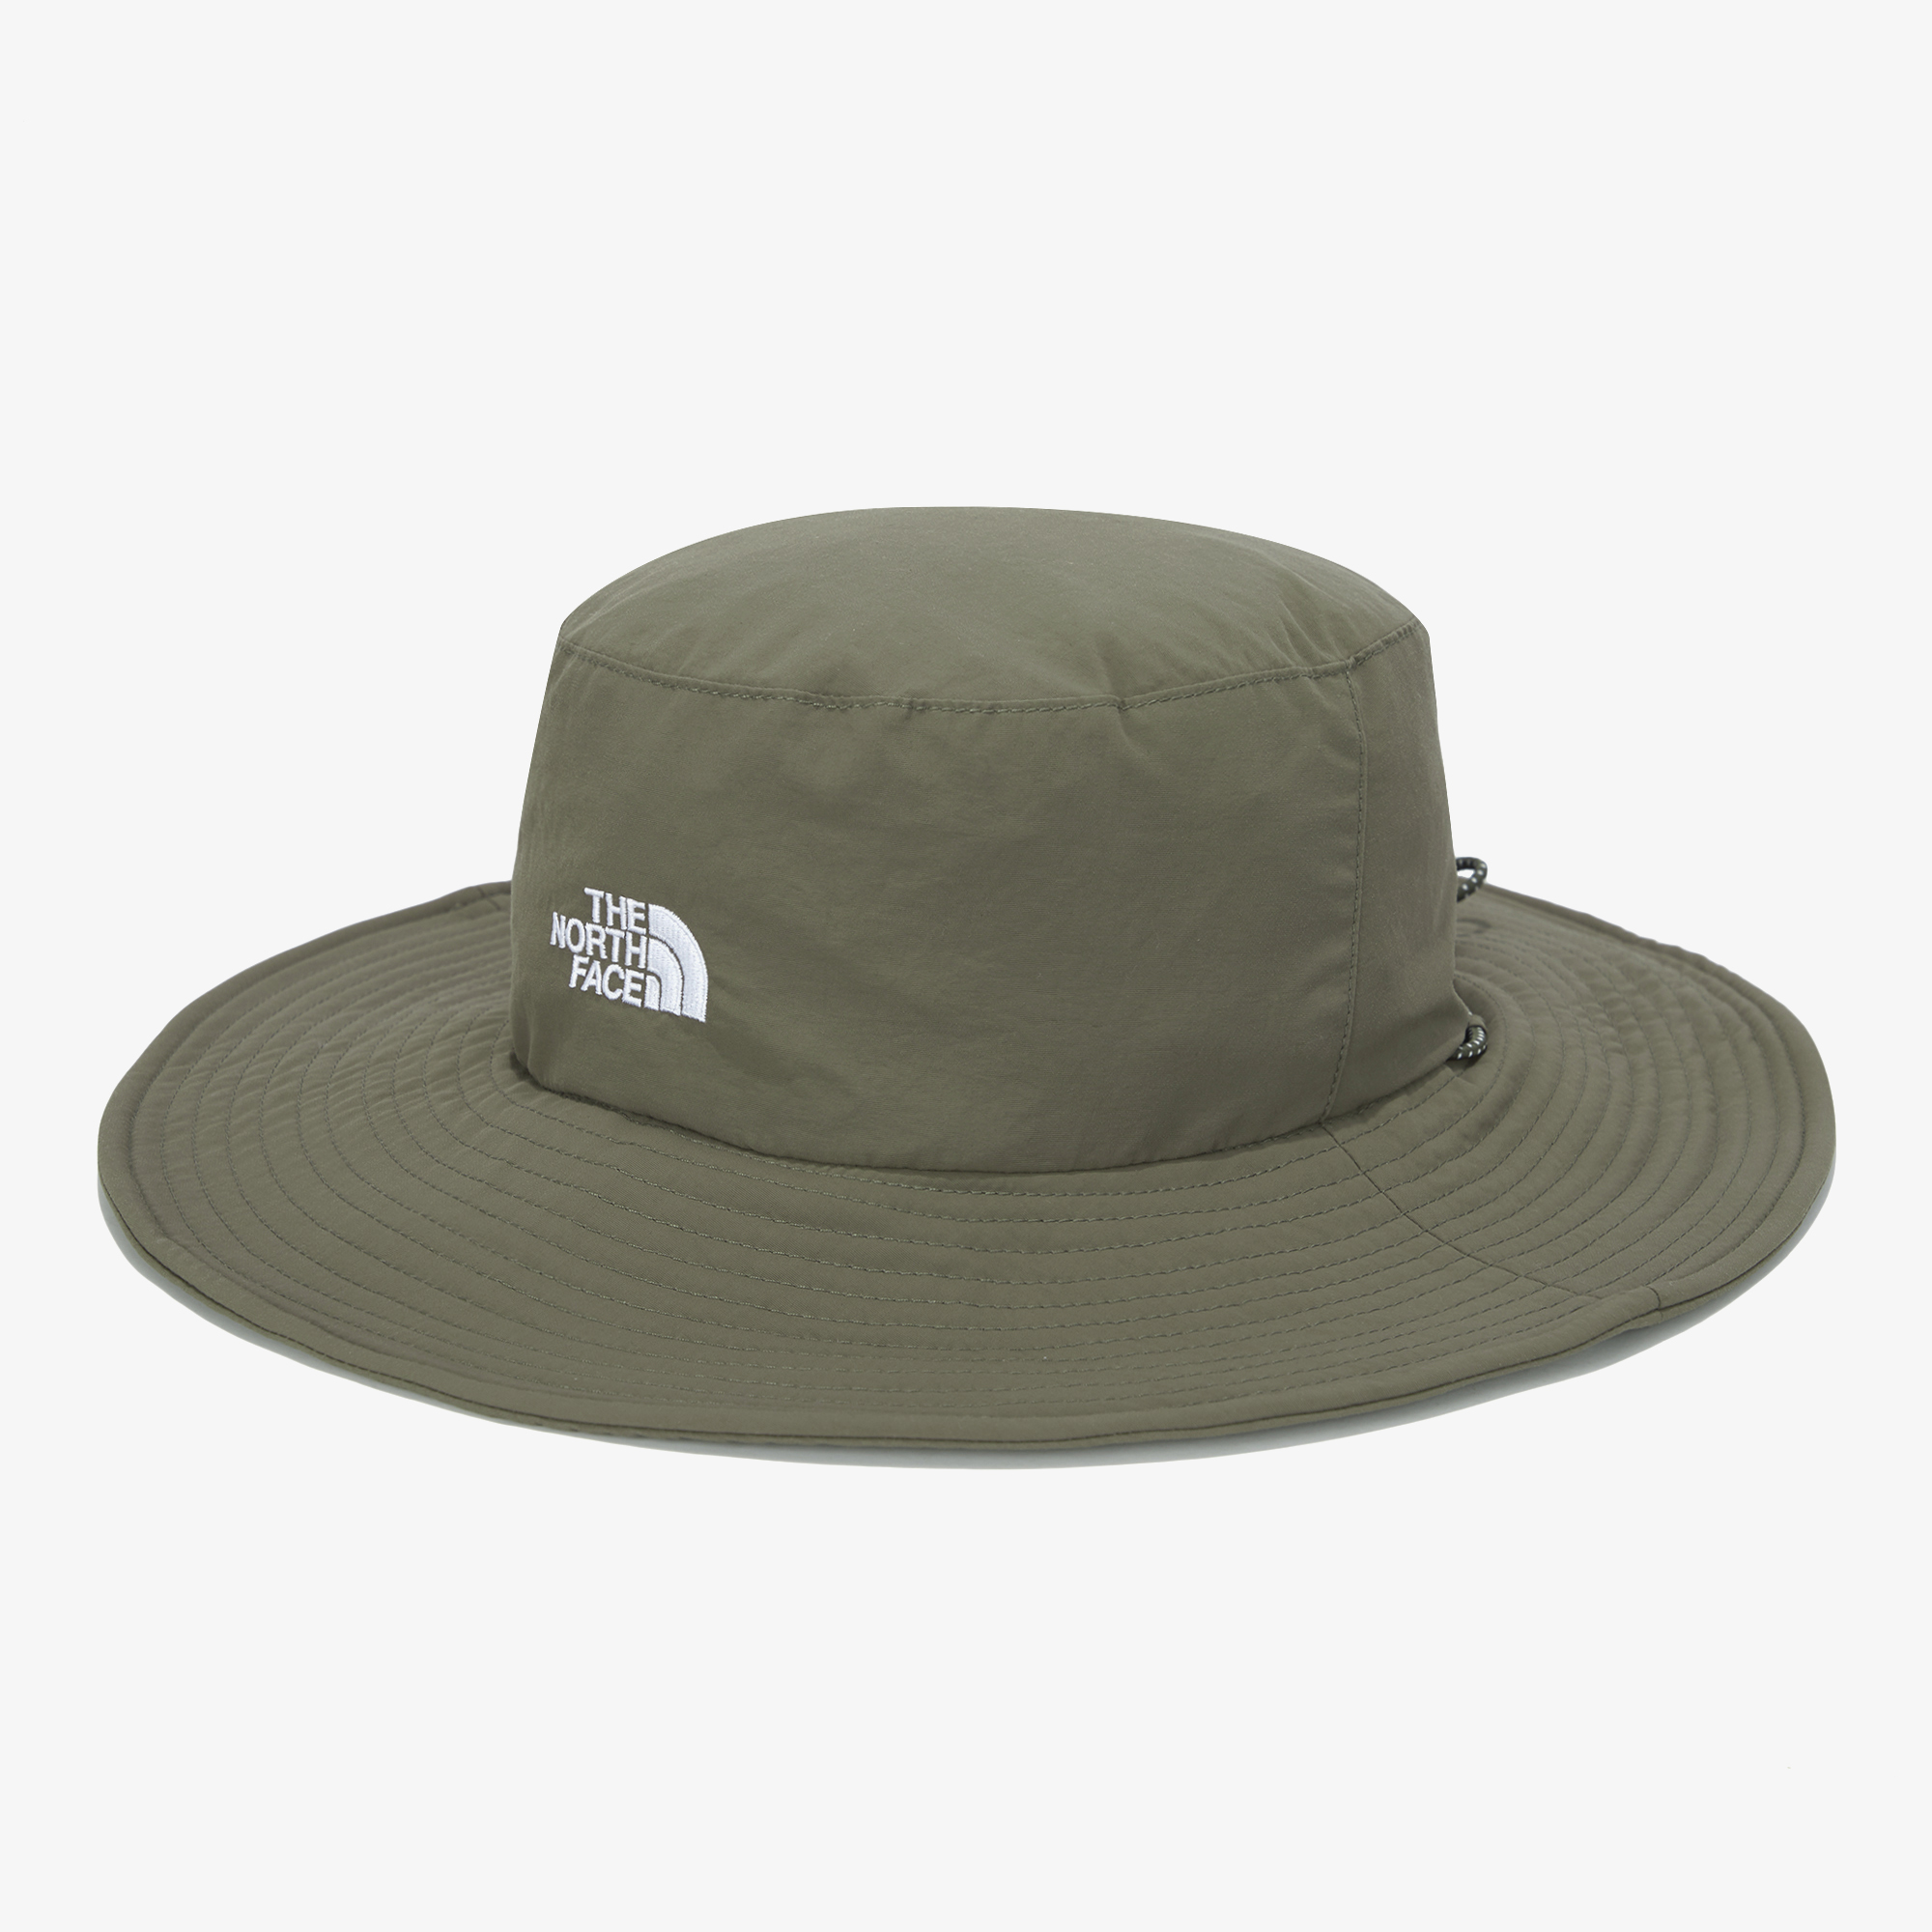 THE NORTH FACE-ECO TREKKING HAT